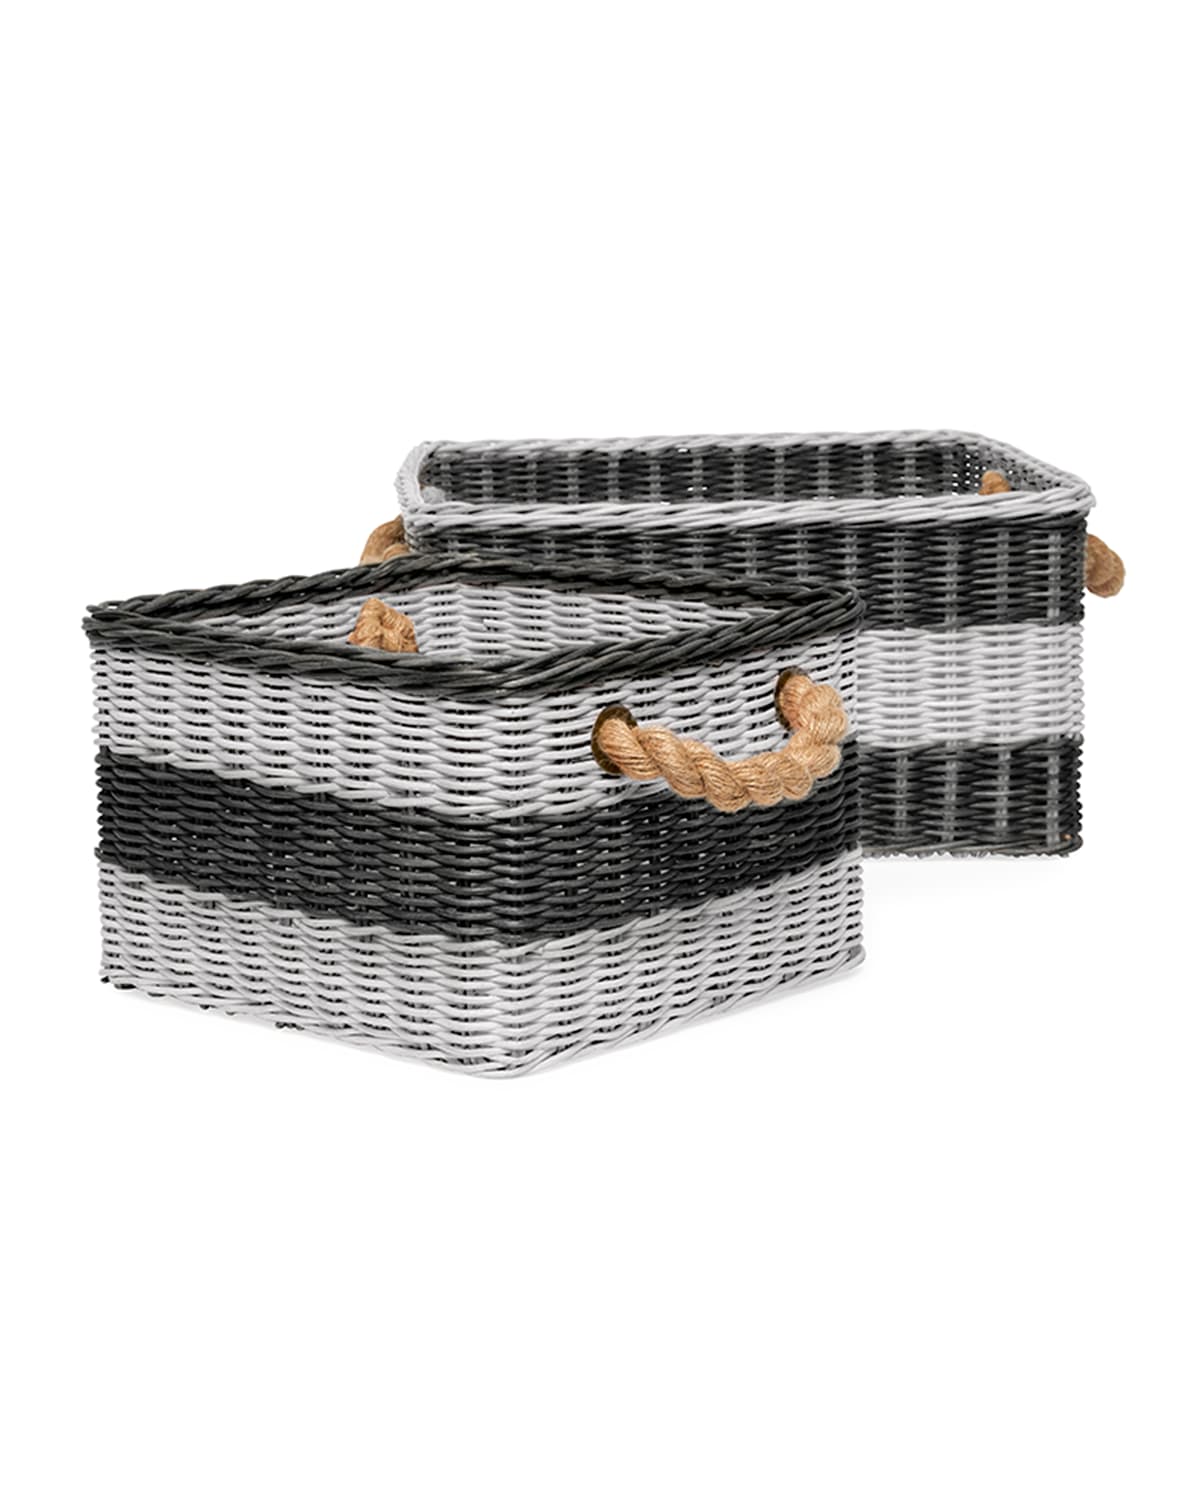 Pigeon & Poodle Nantucket Nested Storage Baskets, Set Of Two In Gray/white